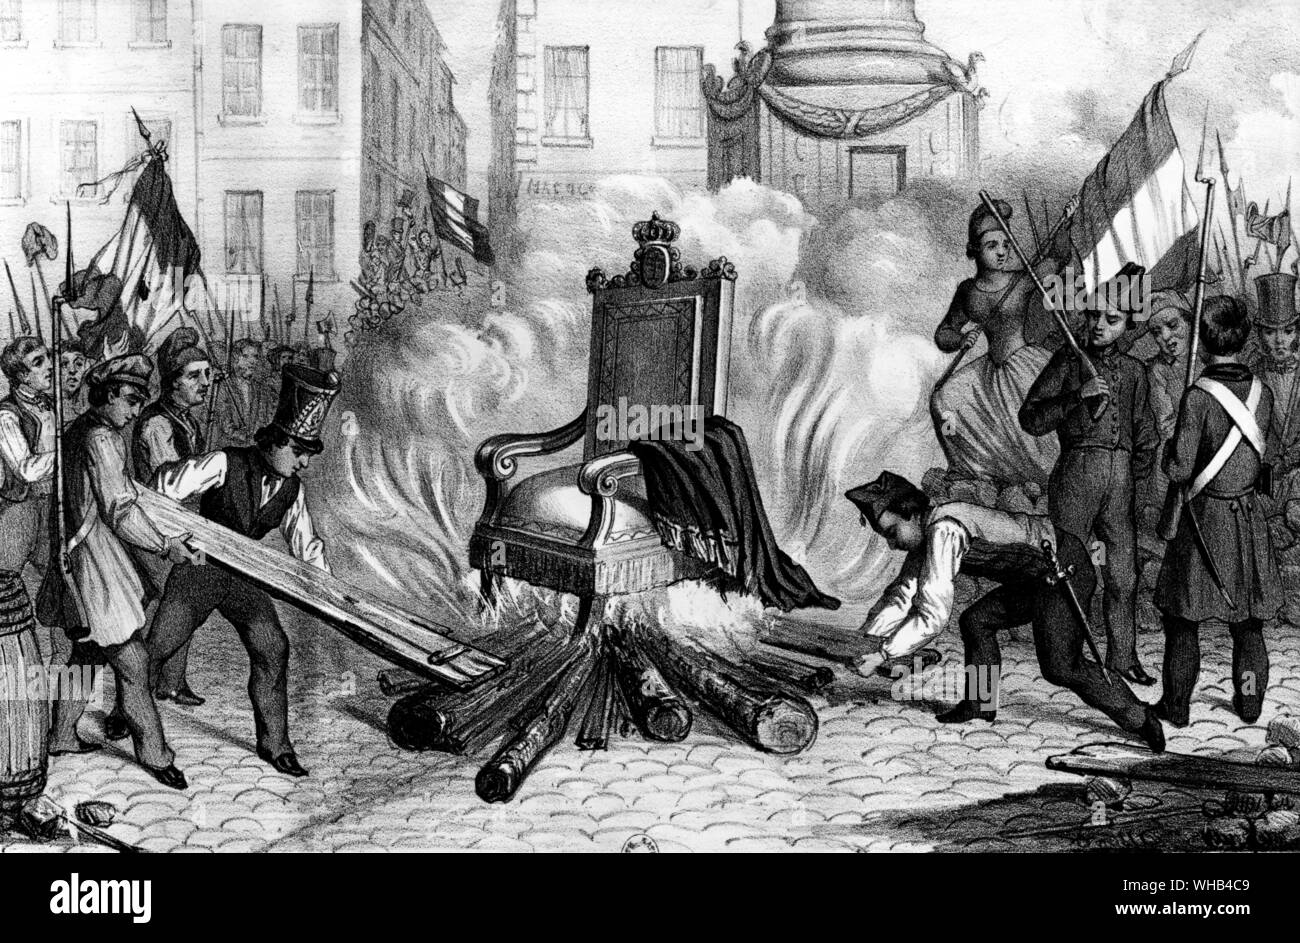 Burning of the throne on 25 February 1848 in Paris. Stock Photo